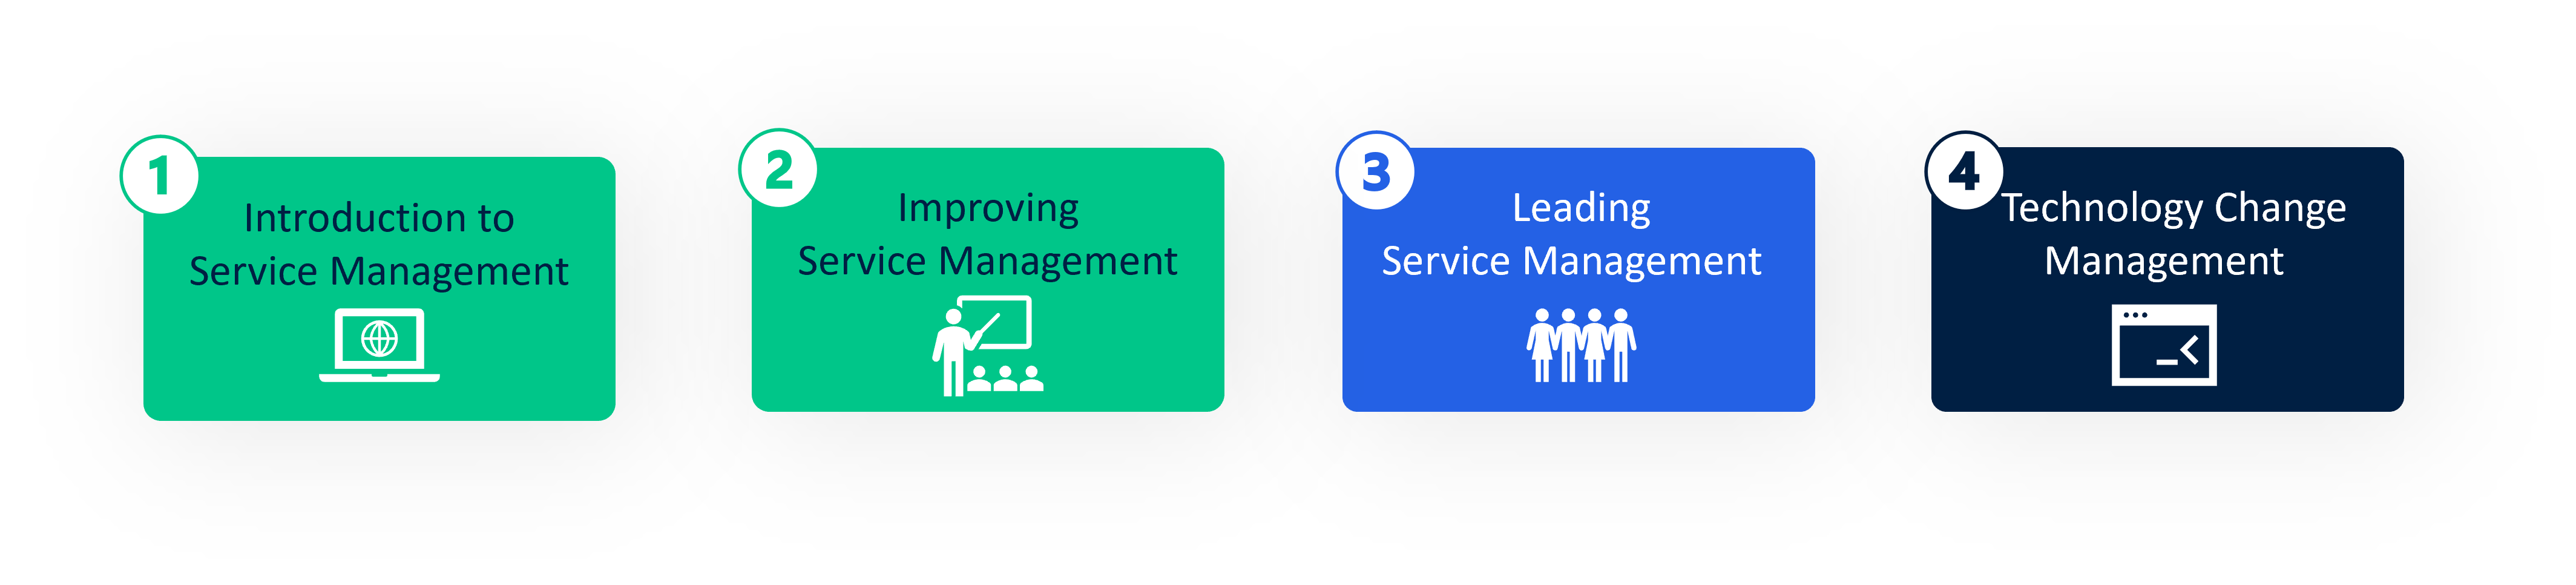 Service Management training overview